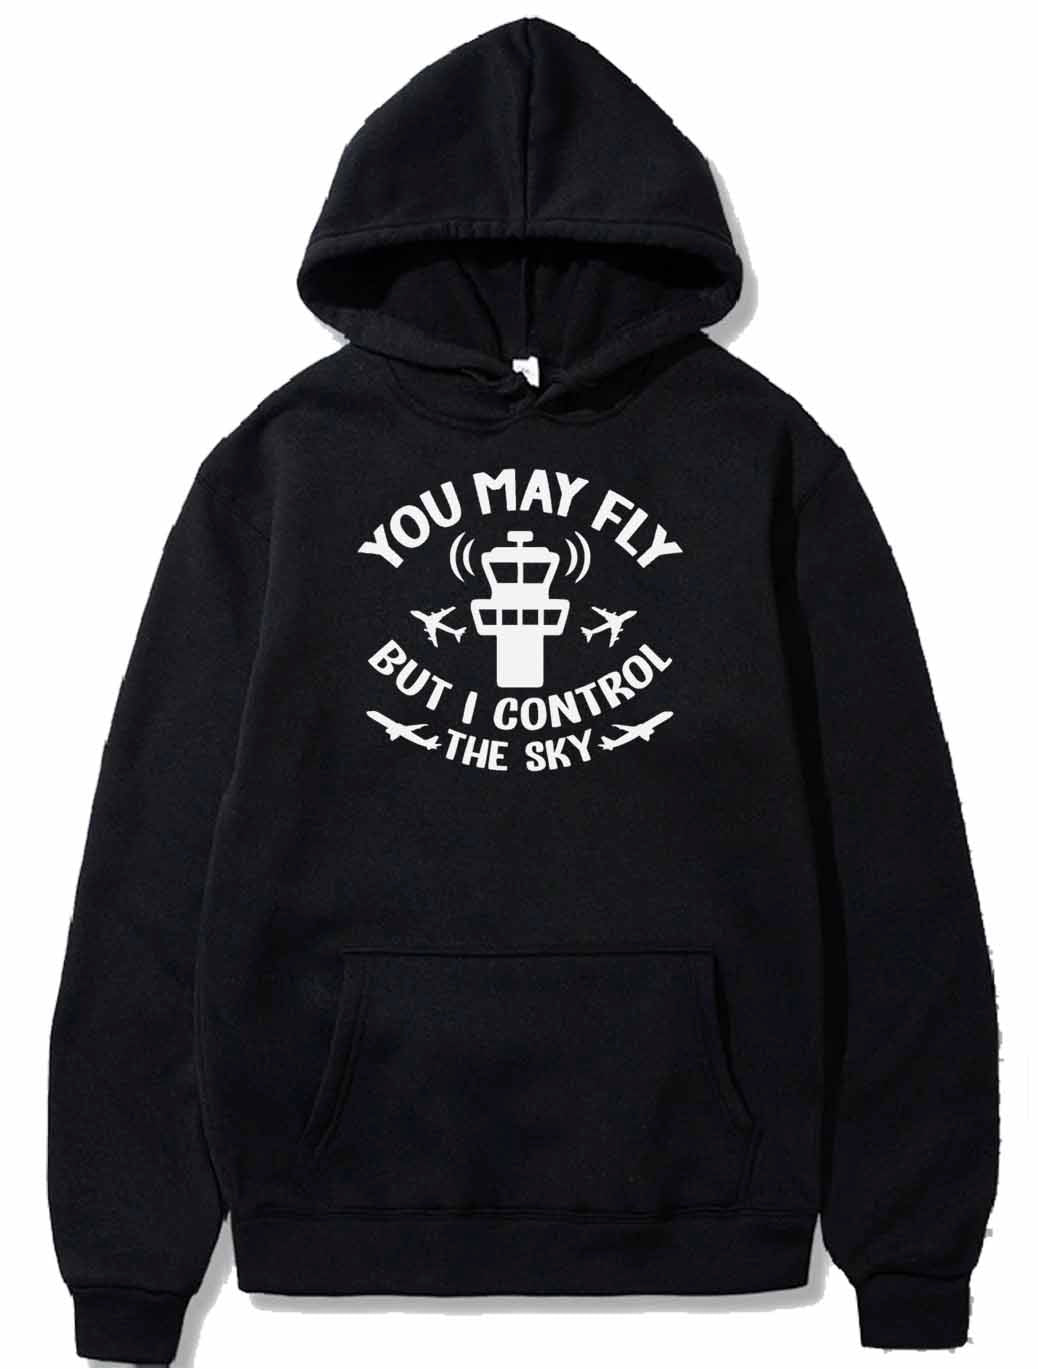 You May Fly But I Control The Sky - Funny ATC Quot PULLOVER THE AV8R